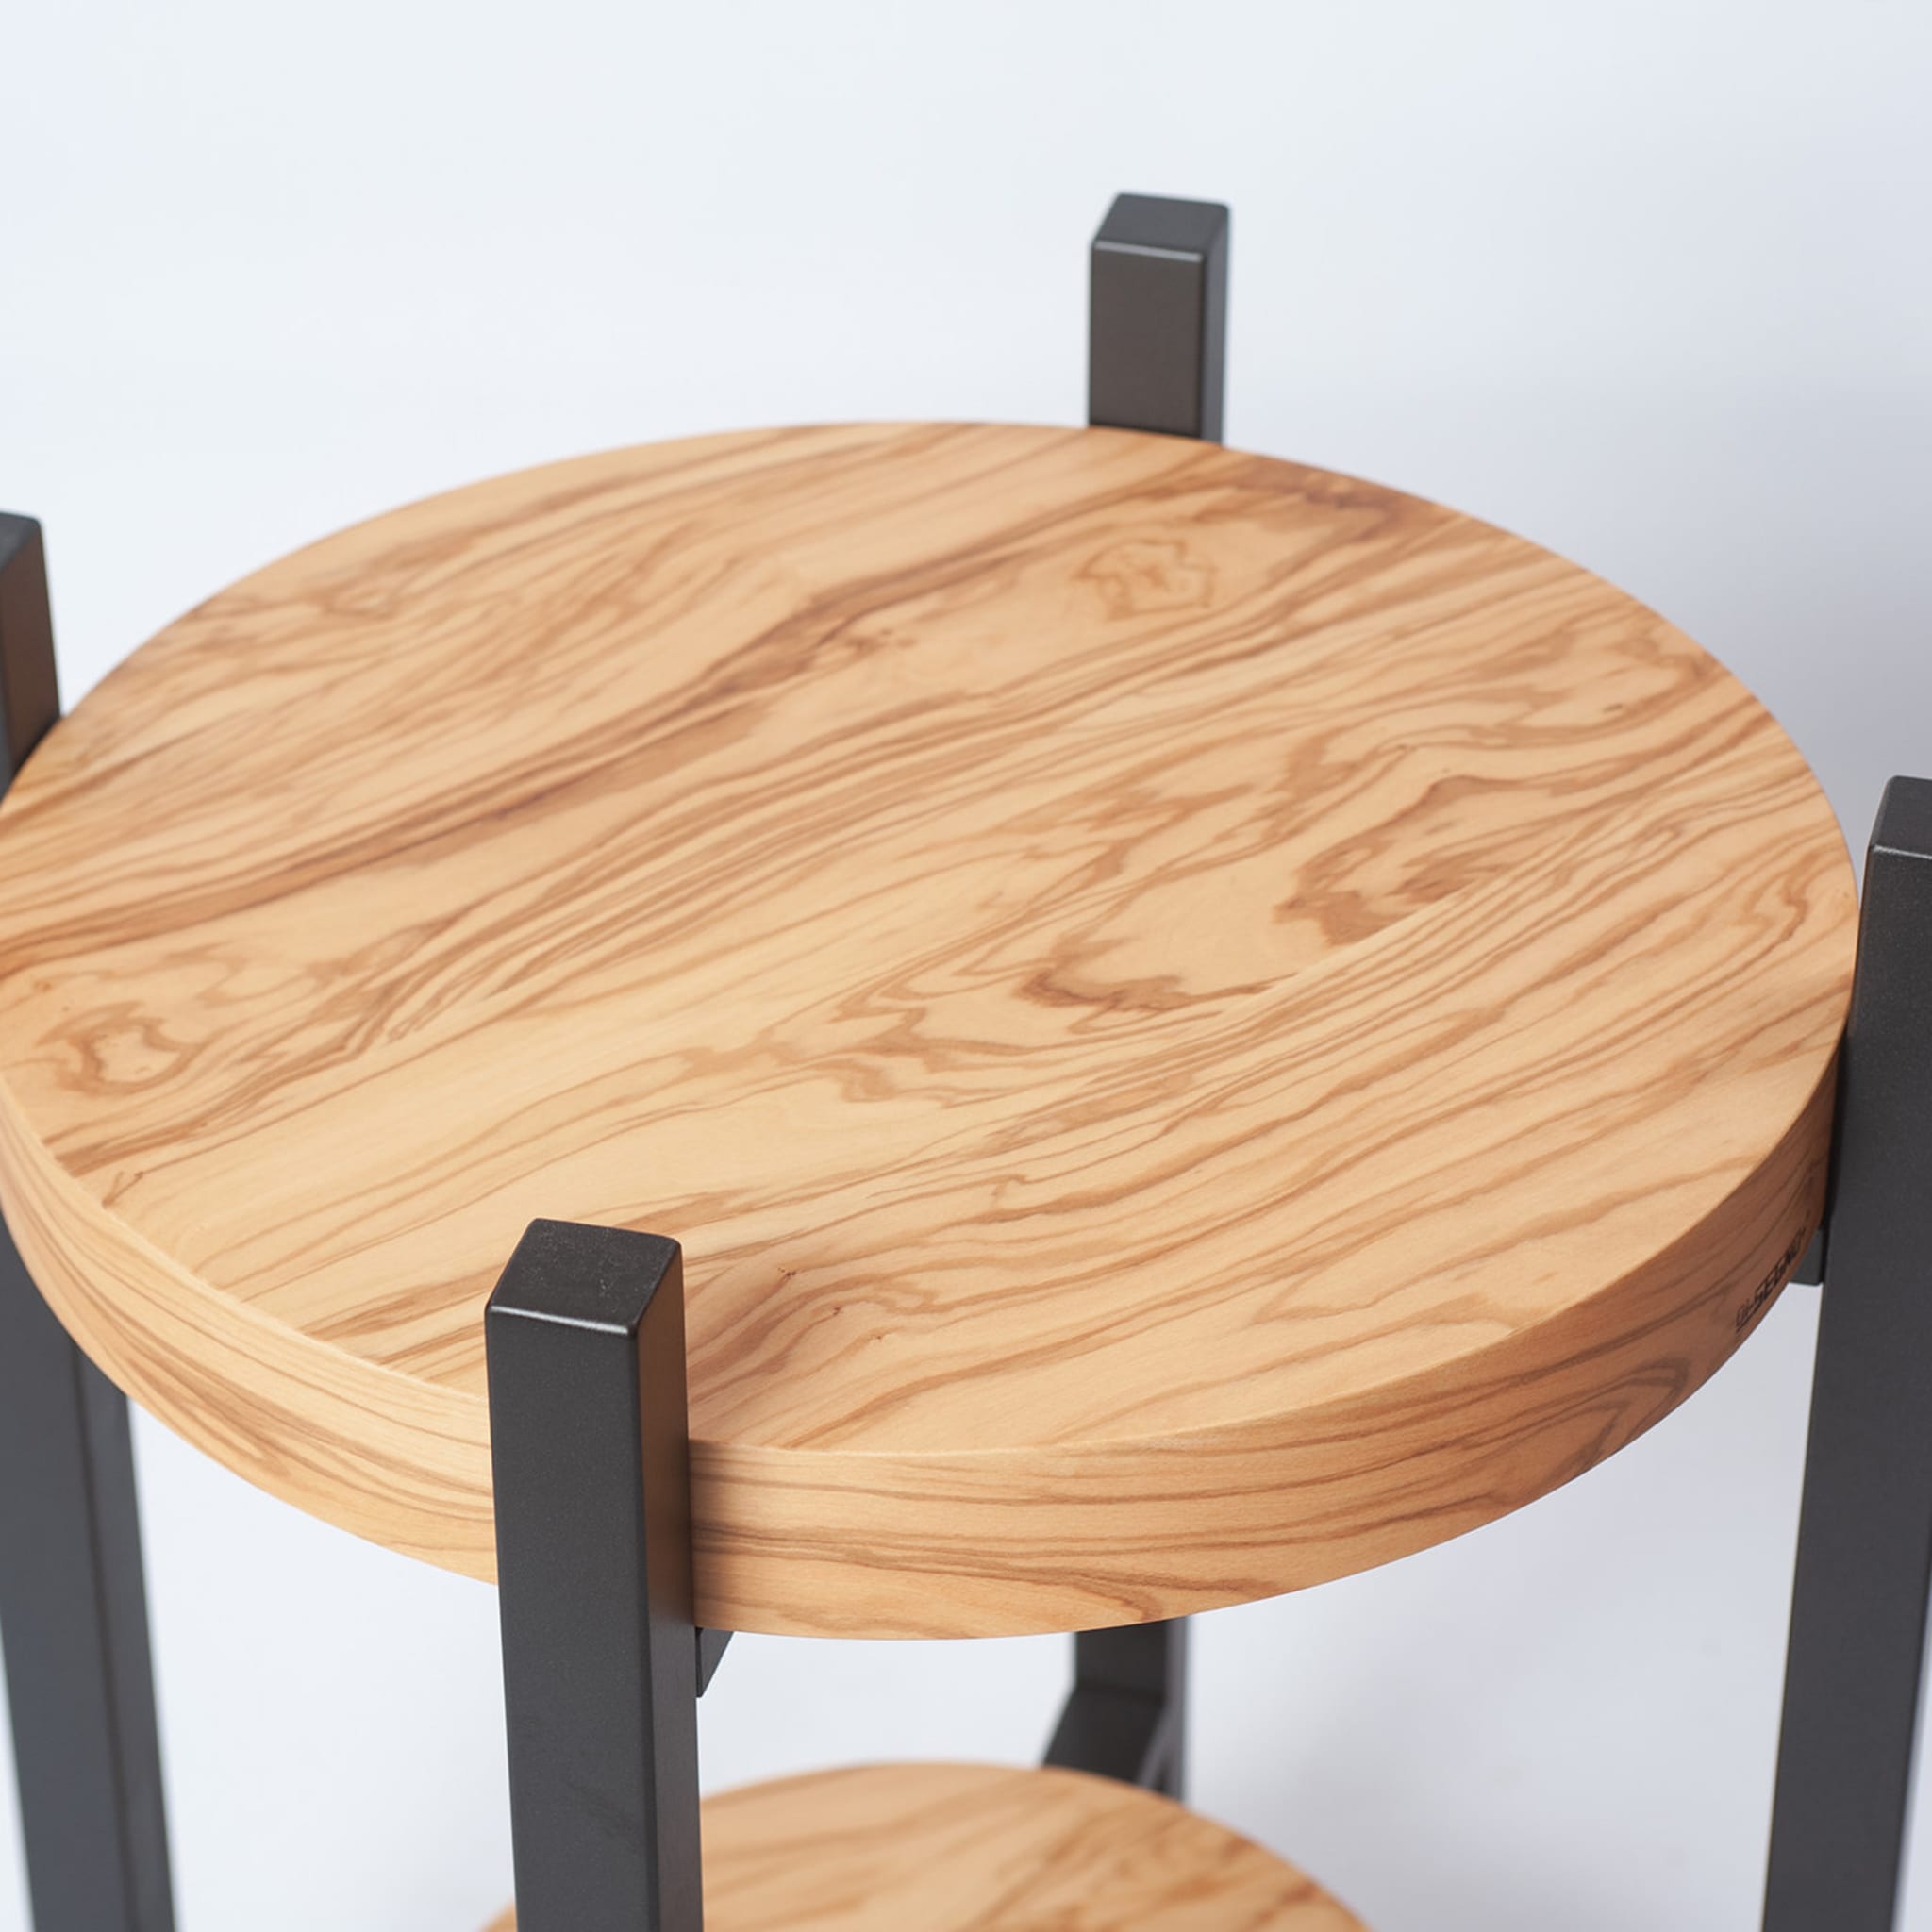 Vortice Olive-Wood Table by Spazio 4.0 - Alternative view 3